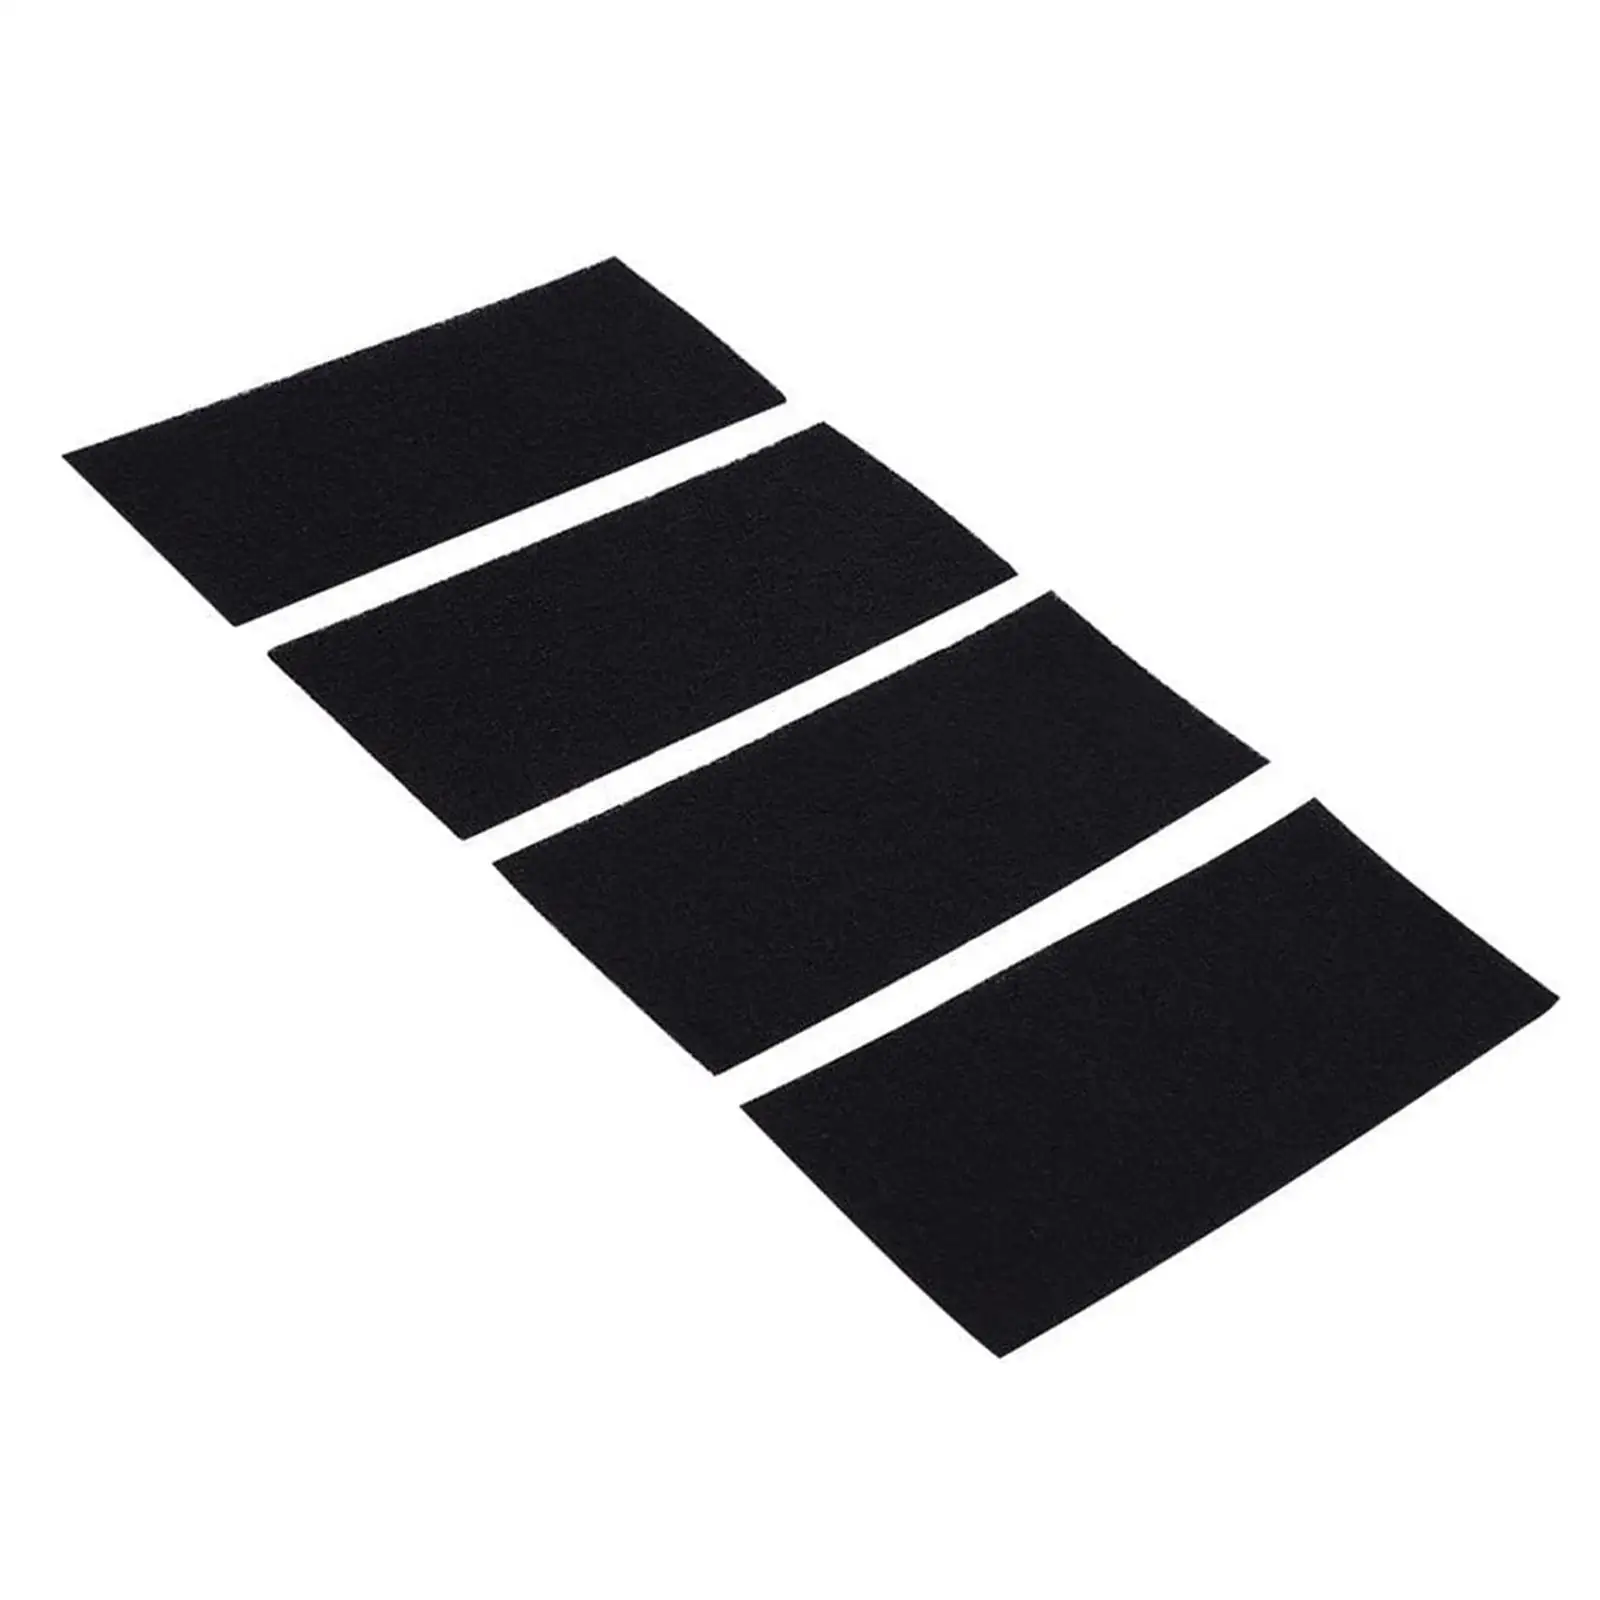 4 Pieces Activated Carbon Filter Rectangle Sponge Direct Replaces Tool Air Filter for Holmes Hap2400 Hap242 Hap412 Hap422